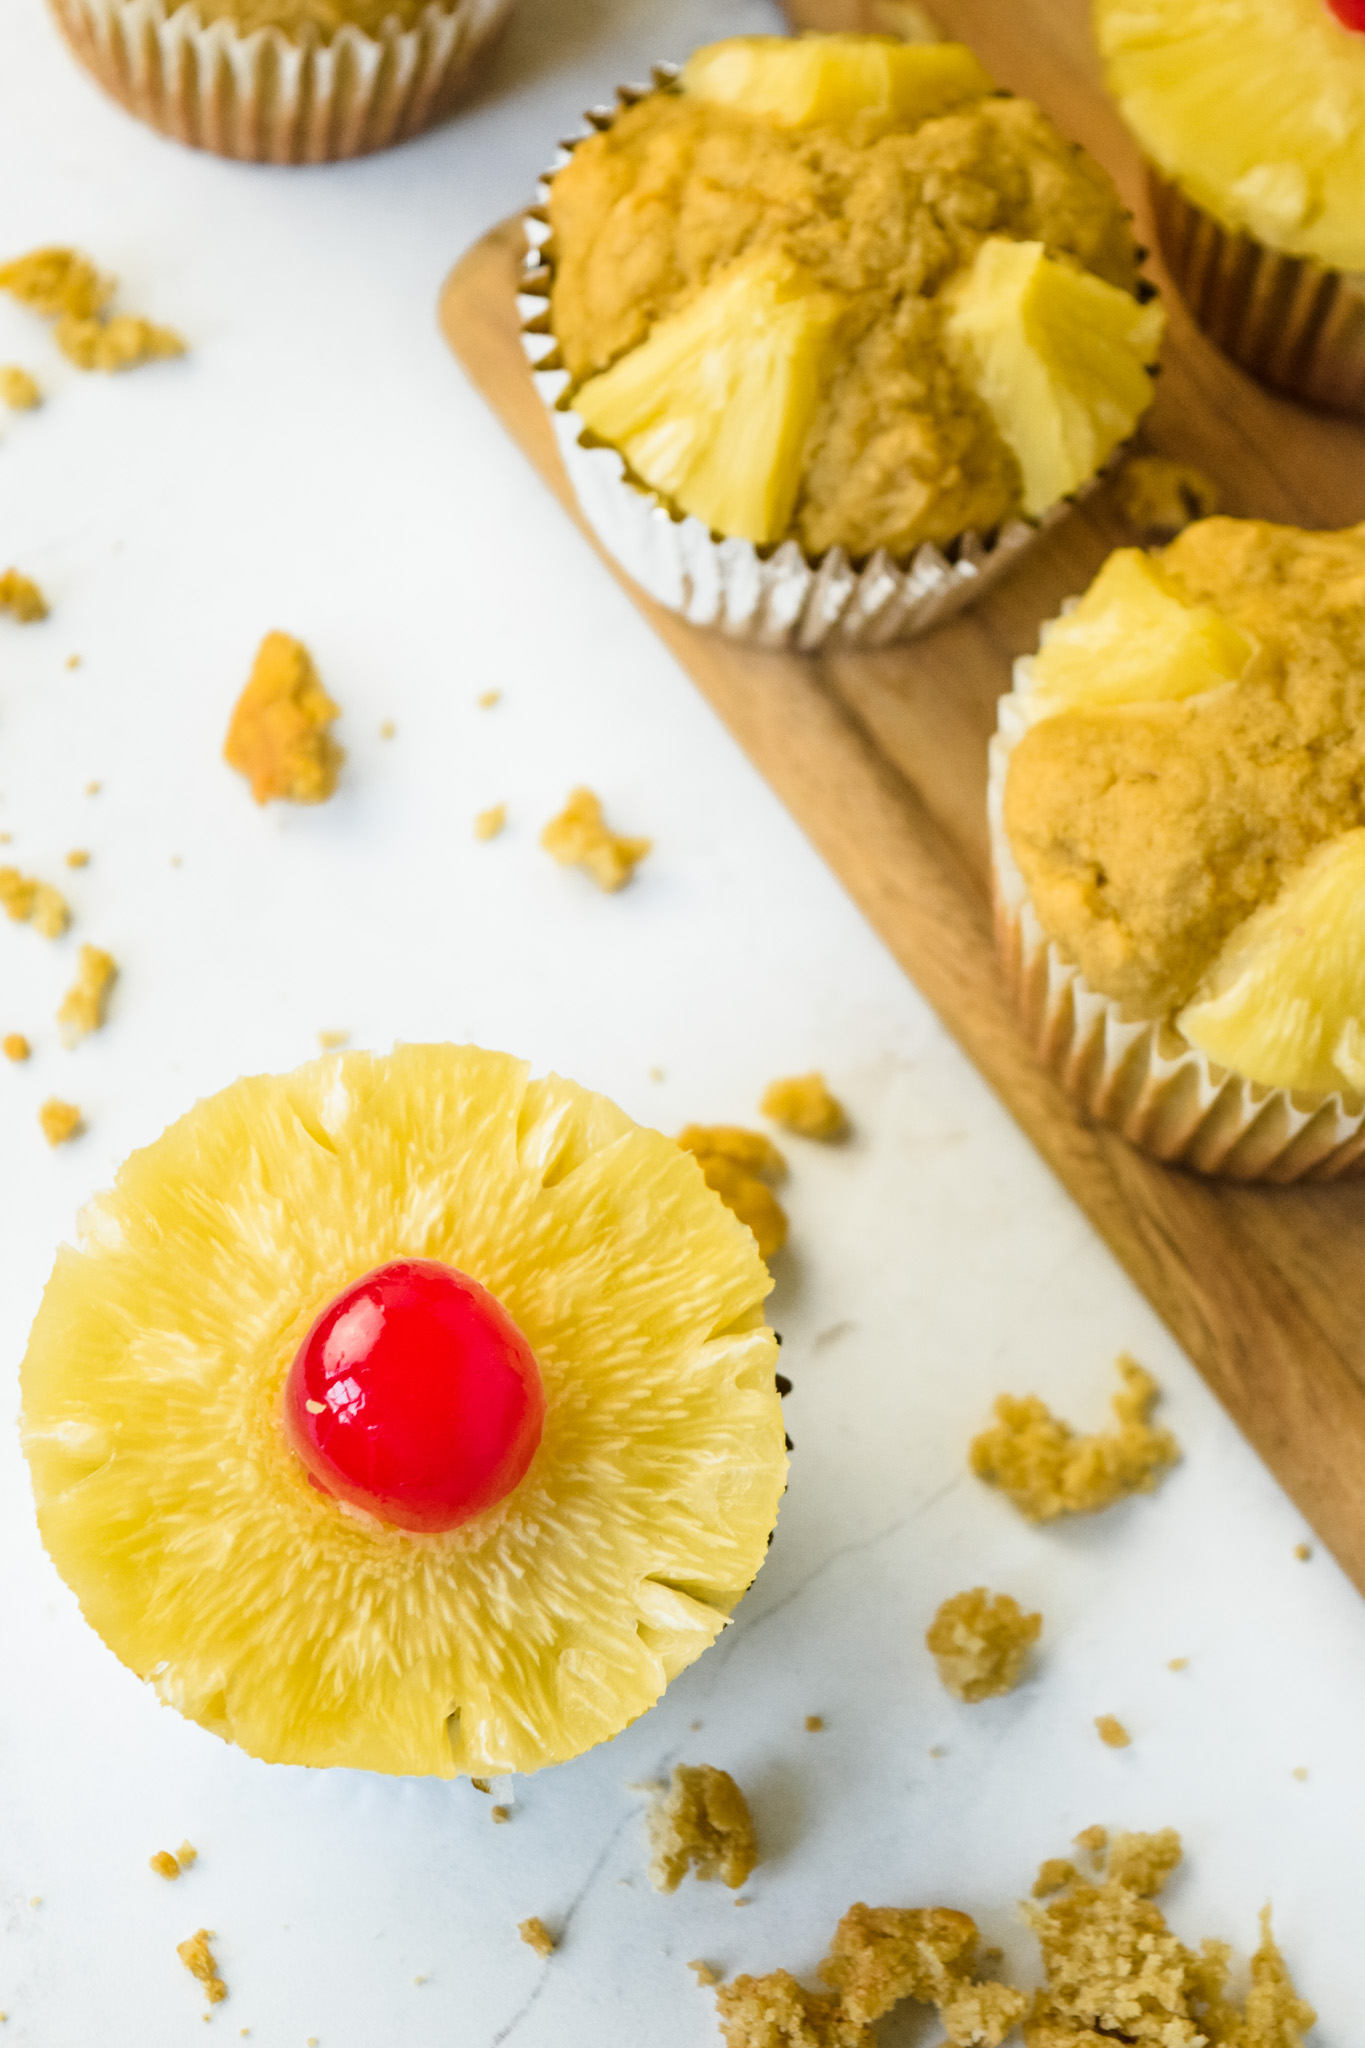 Gluten Free Pineapple muffins with a cherry on top